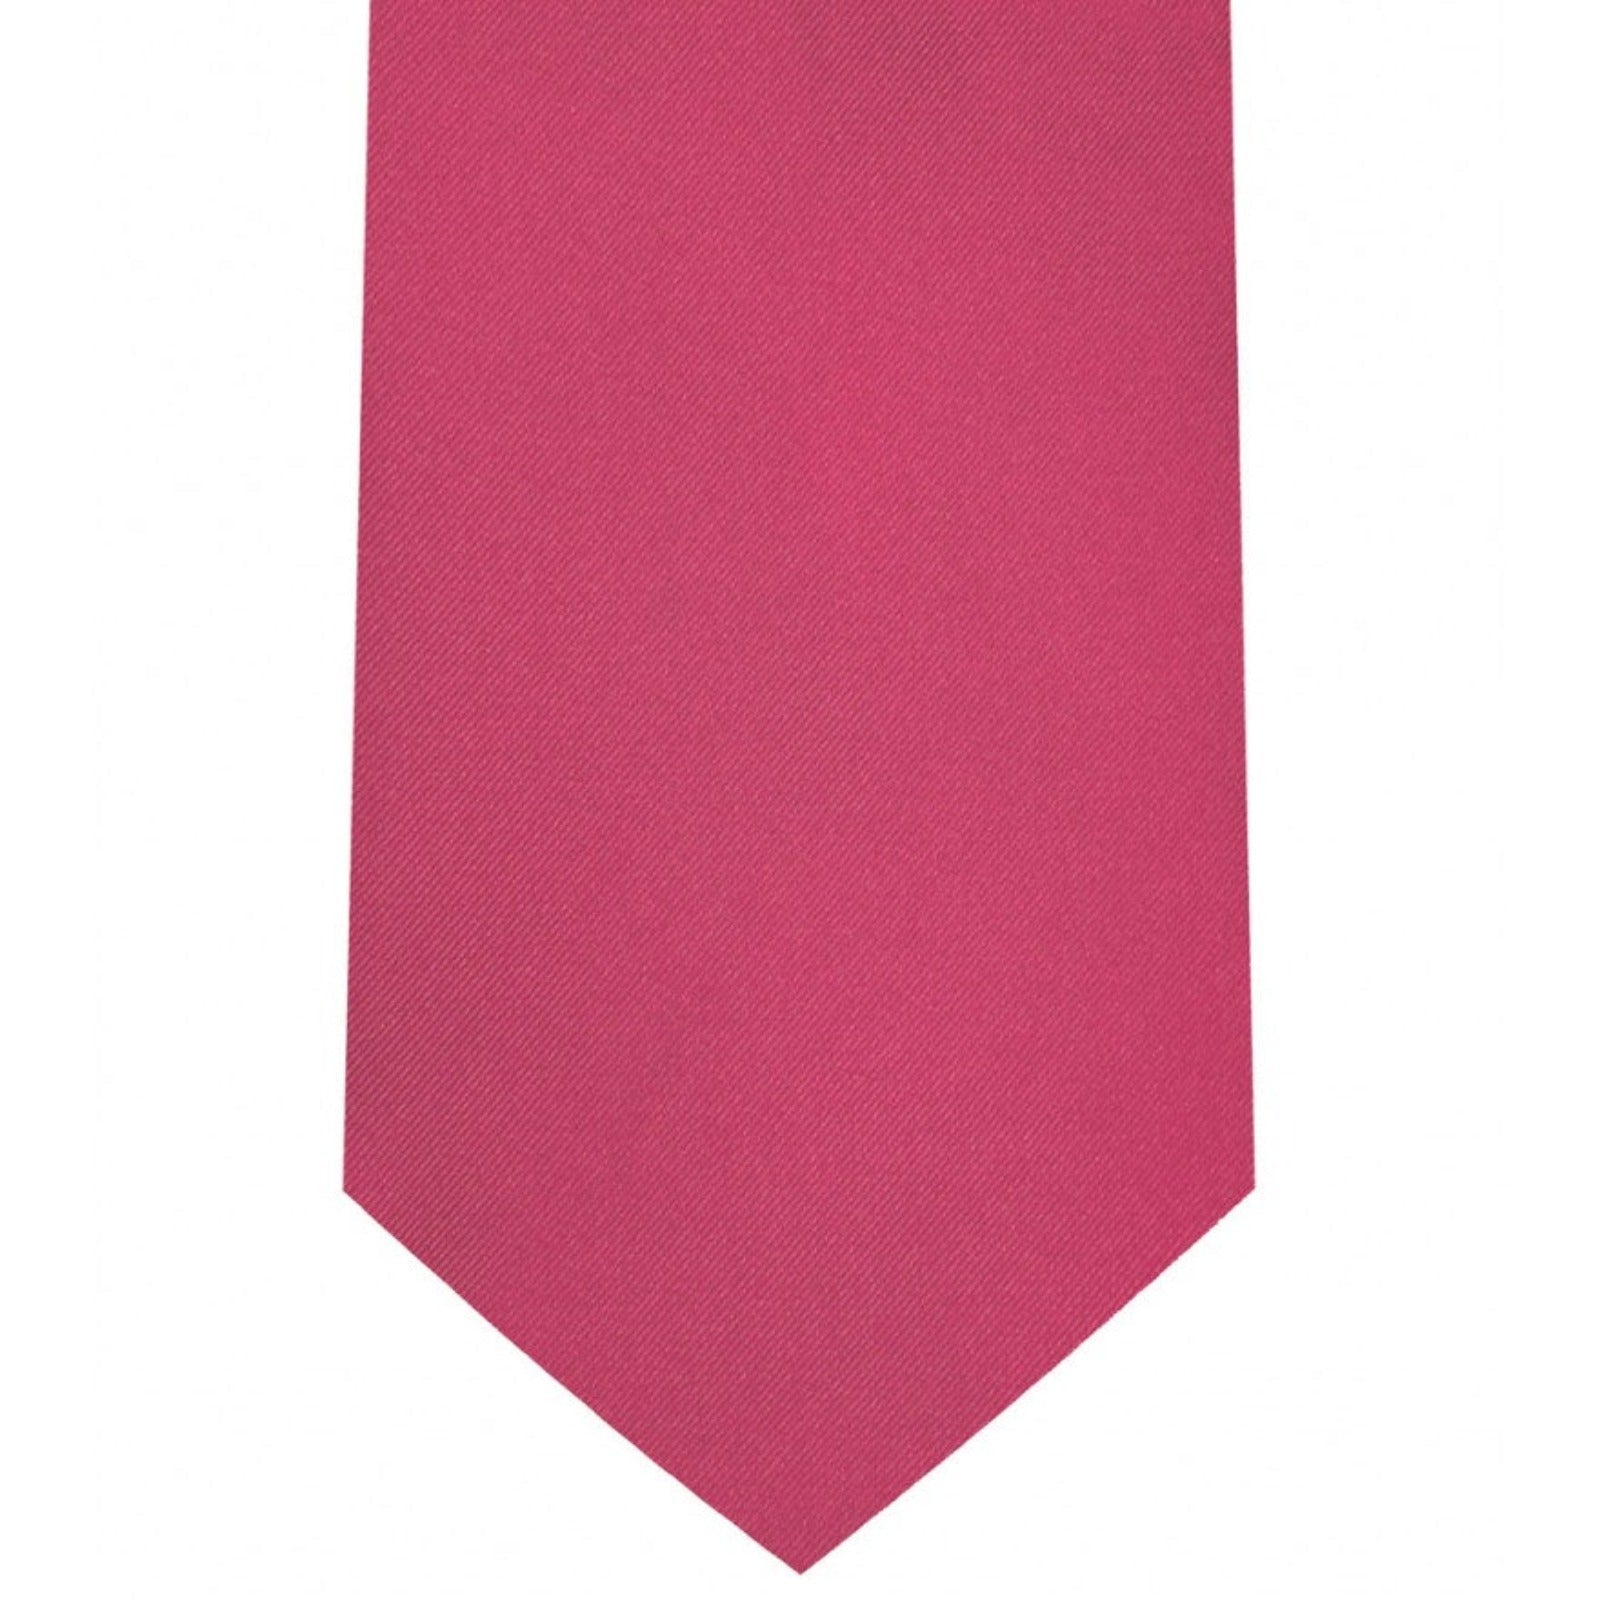 Classic French Rose Tie Regular width 3.5 inches With Matching Pocket Square | KCT Menswear